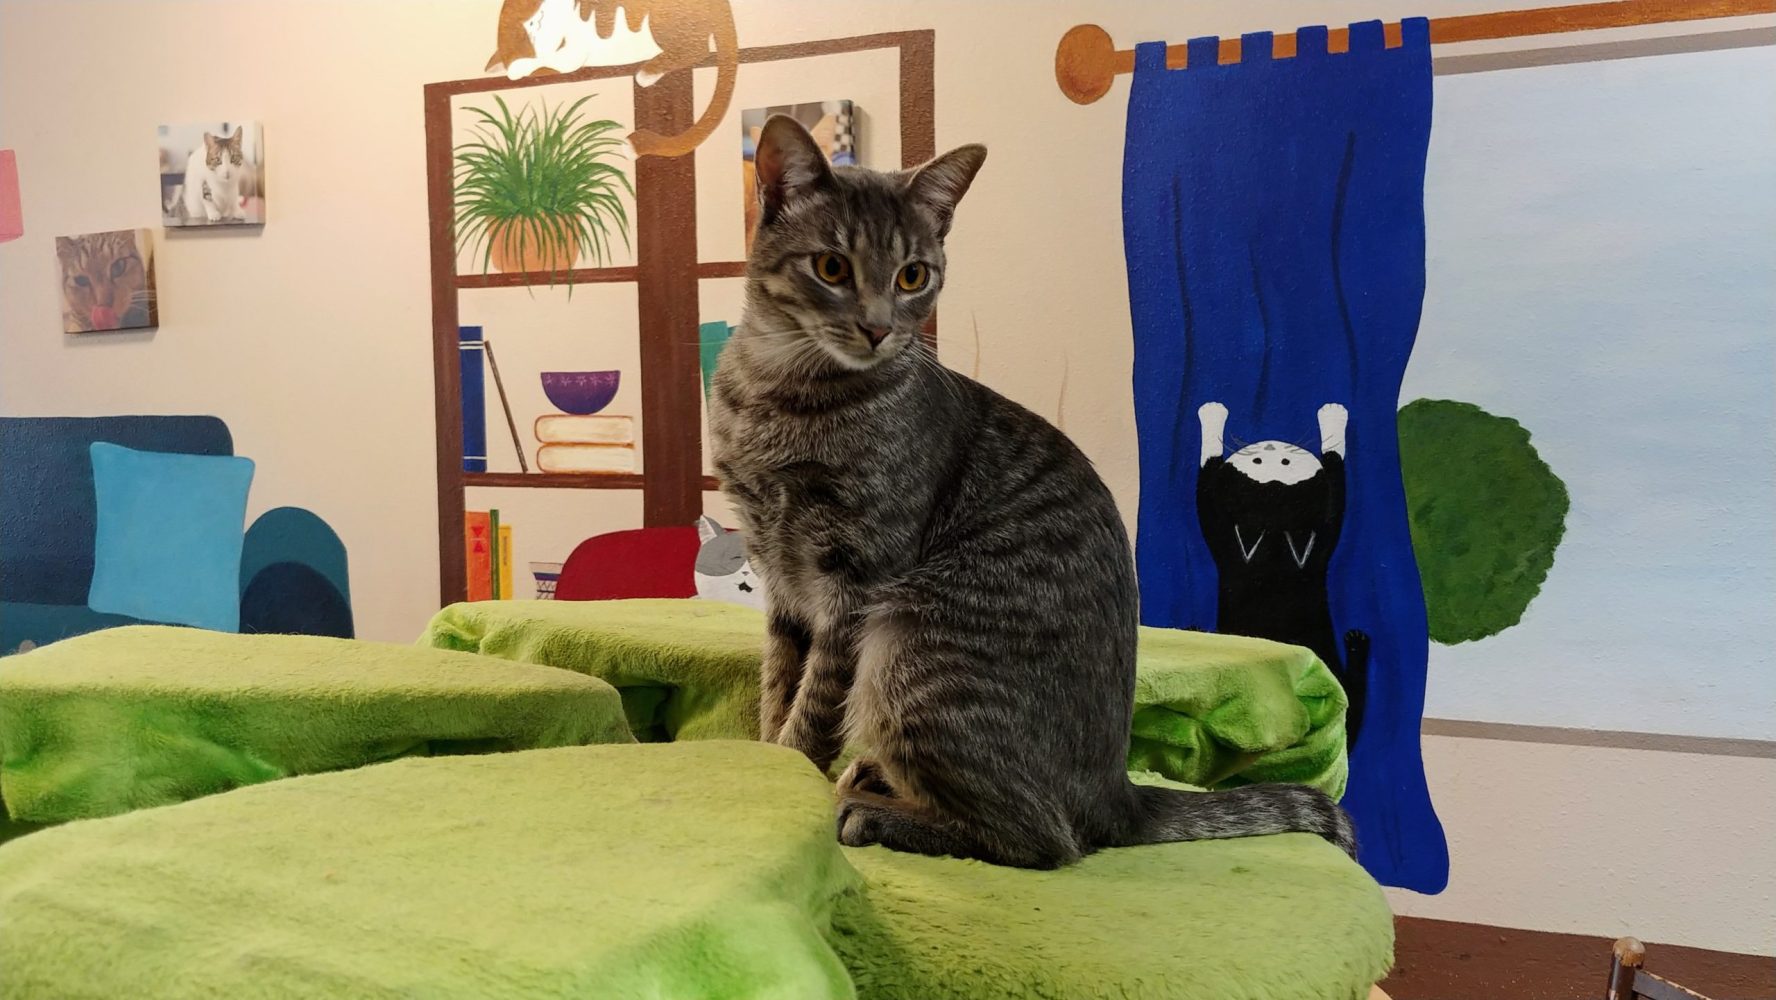 Meet Grace at The Cat Cafe